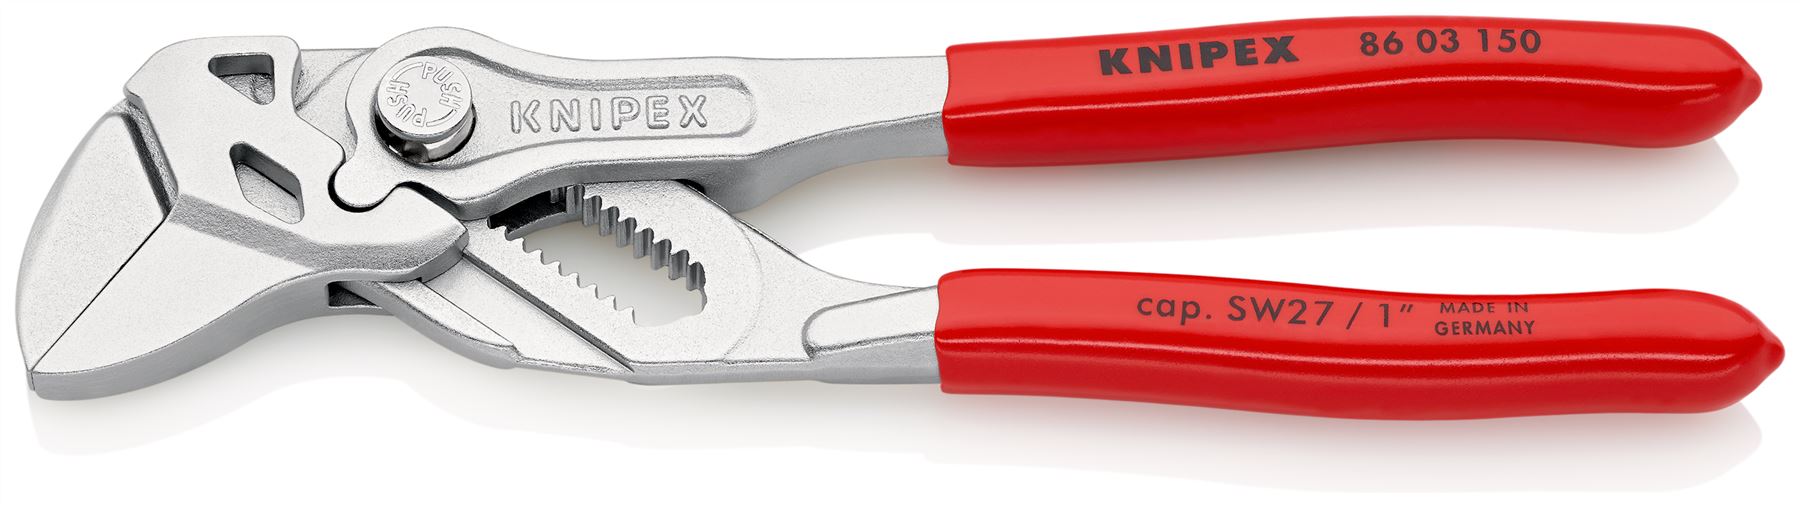 KNIPEX Pliers Wrench Slip Joint Plier 150mm Chrome Plastic Coated Handles 86 03 150 SB